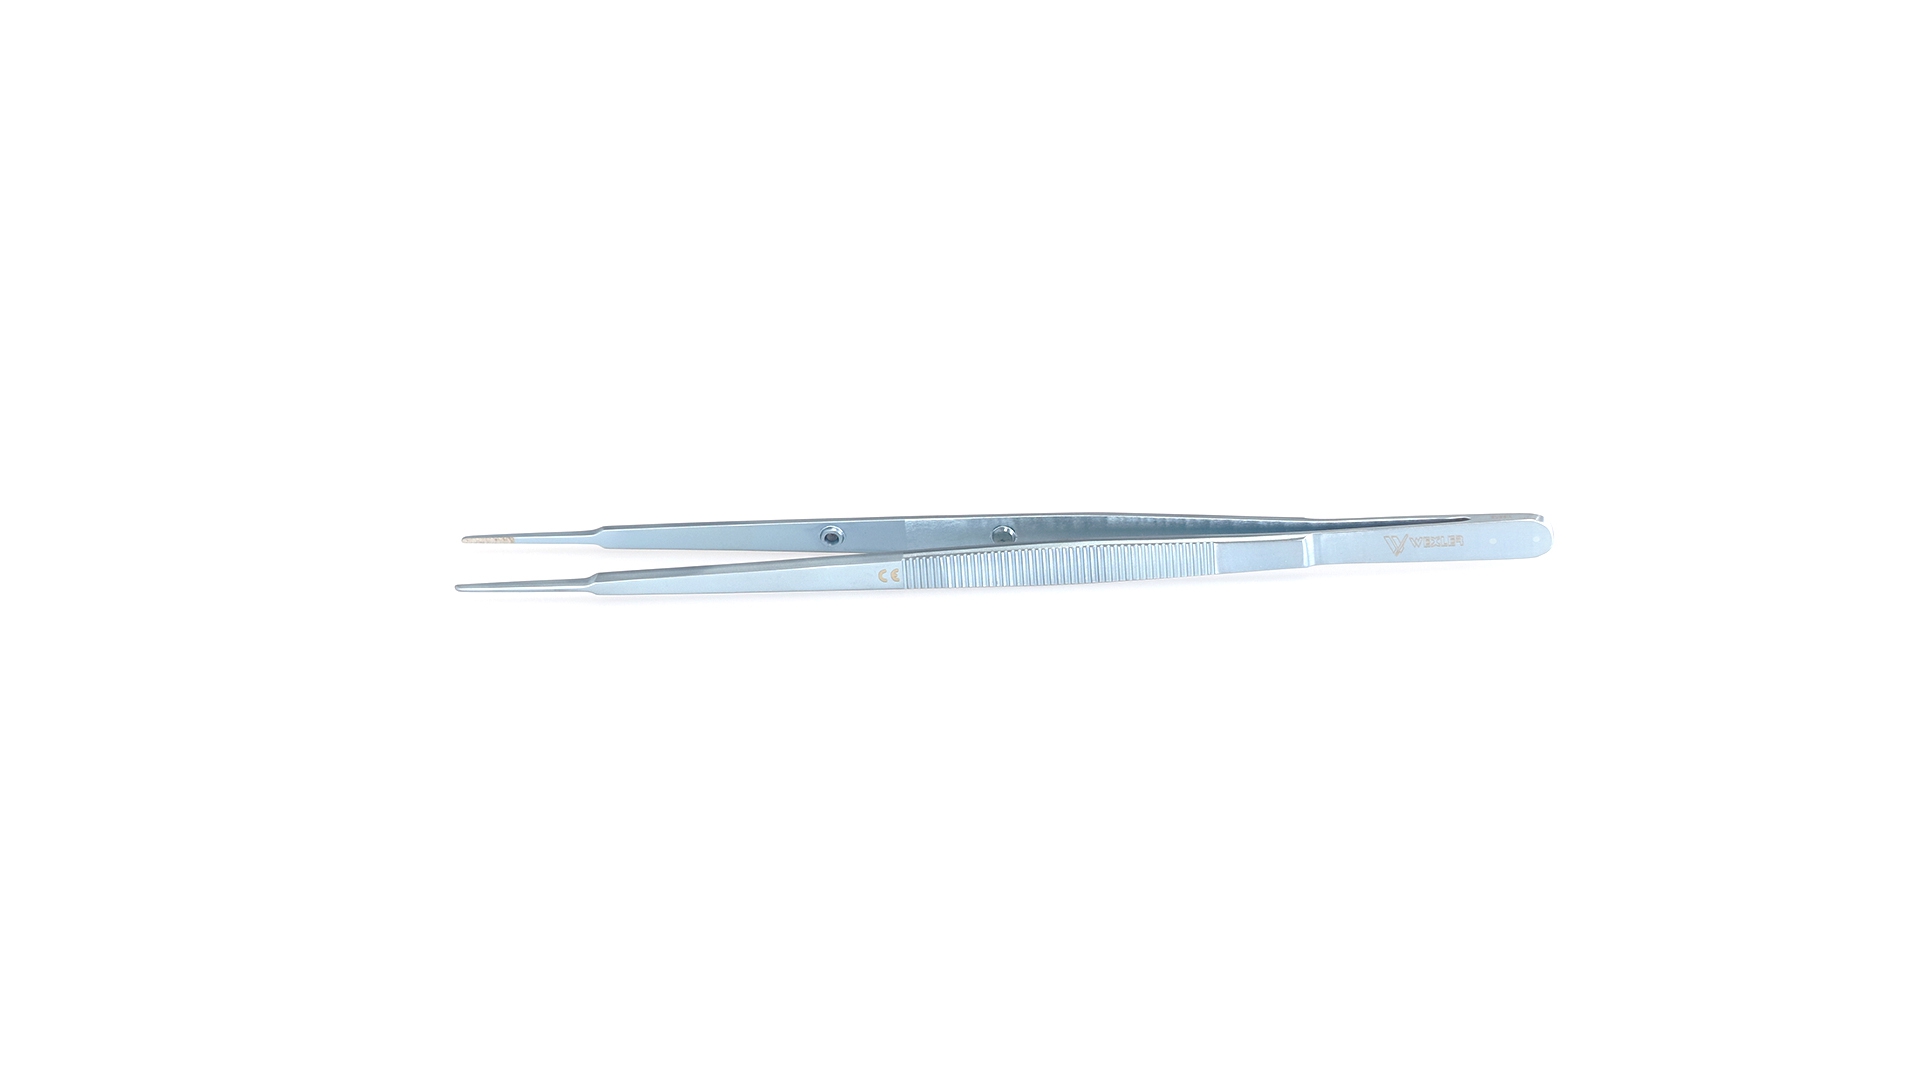 Gerald Forceps - Straight 1mm TC coated tips